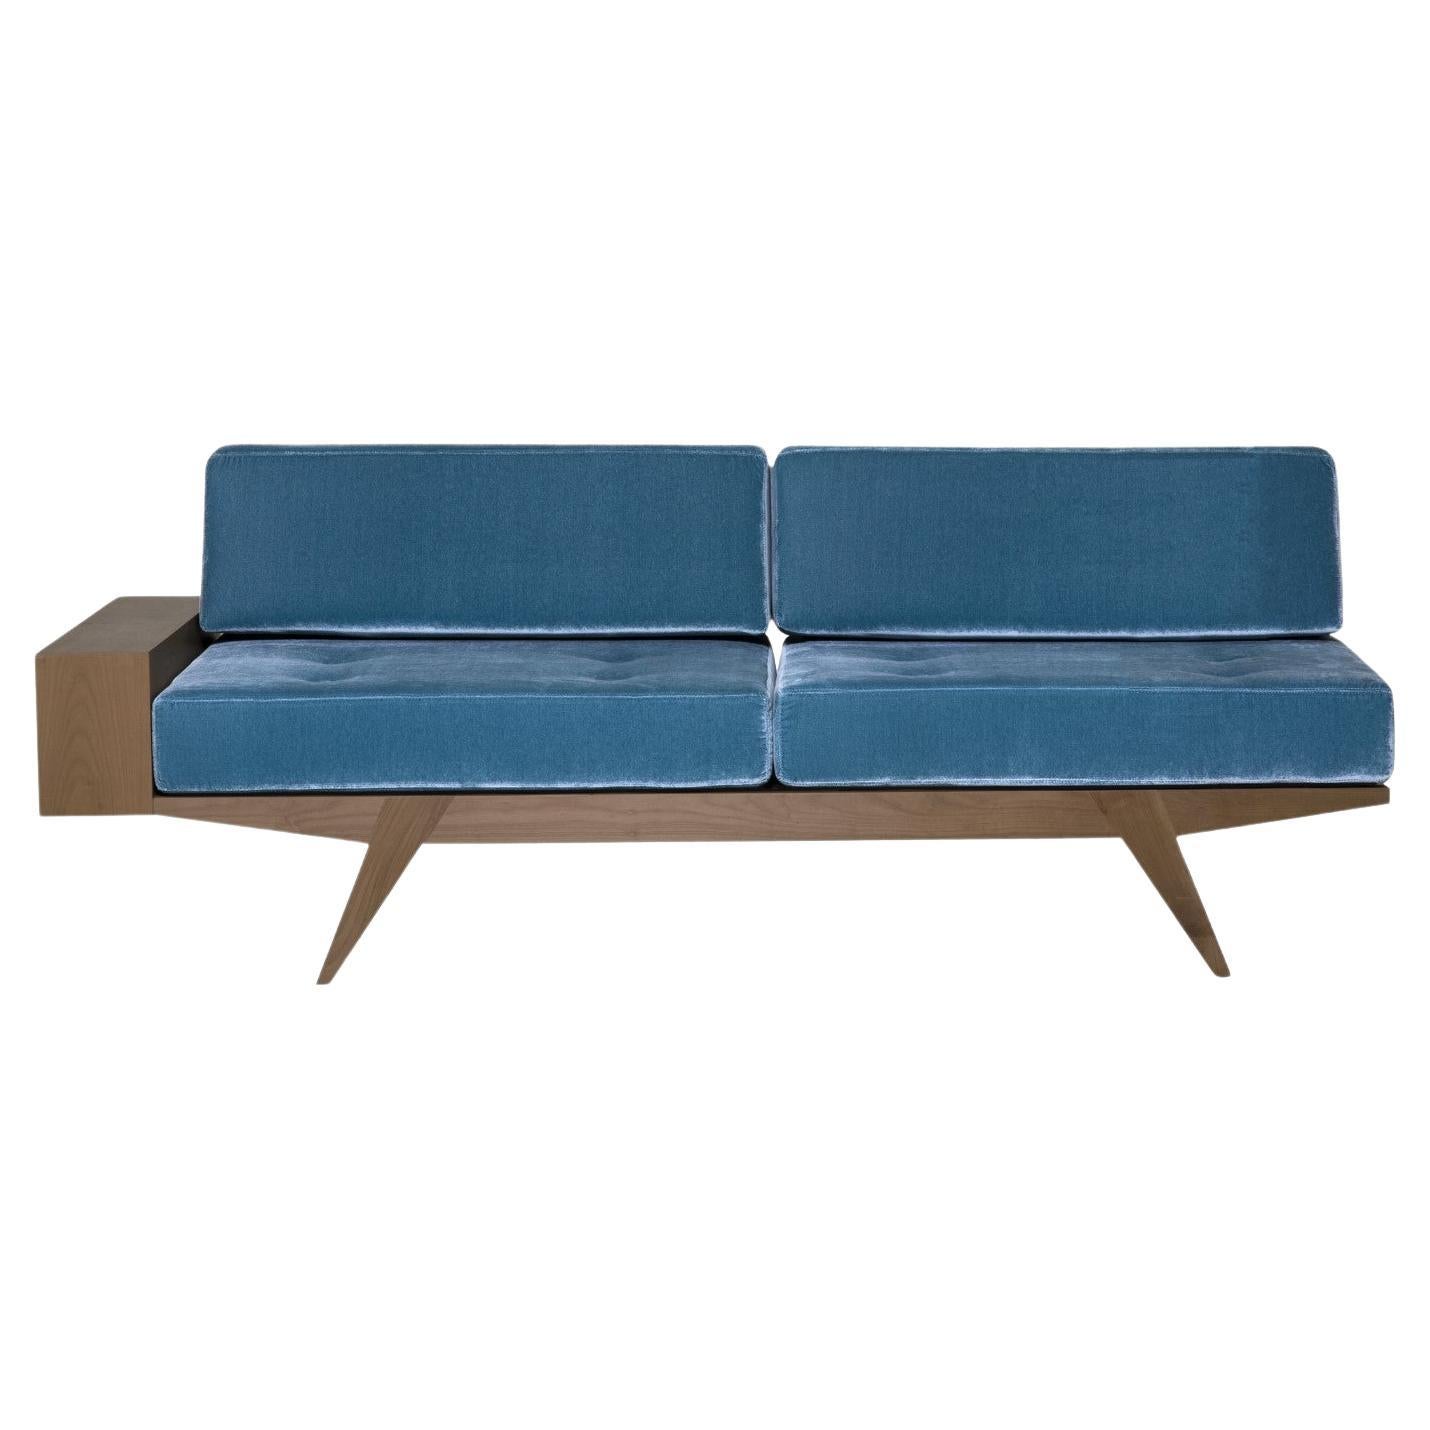 Gio' Contemporary Sofa Bed Made of Solid Cherrywood For Sale